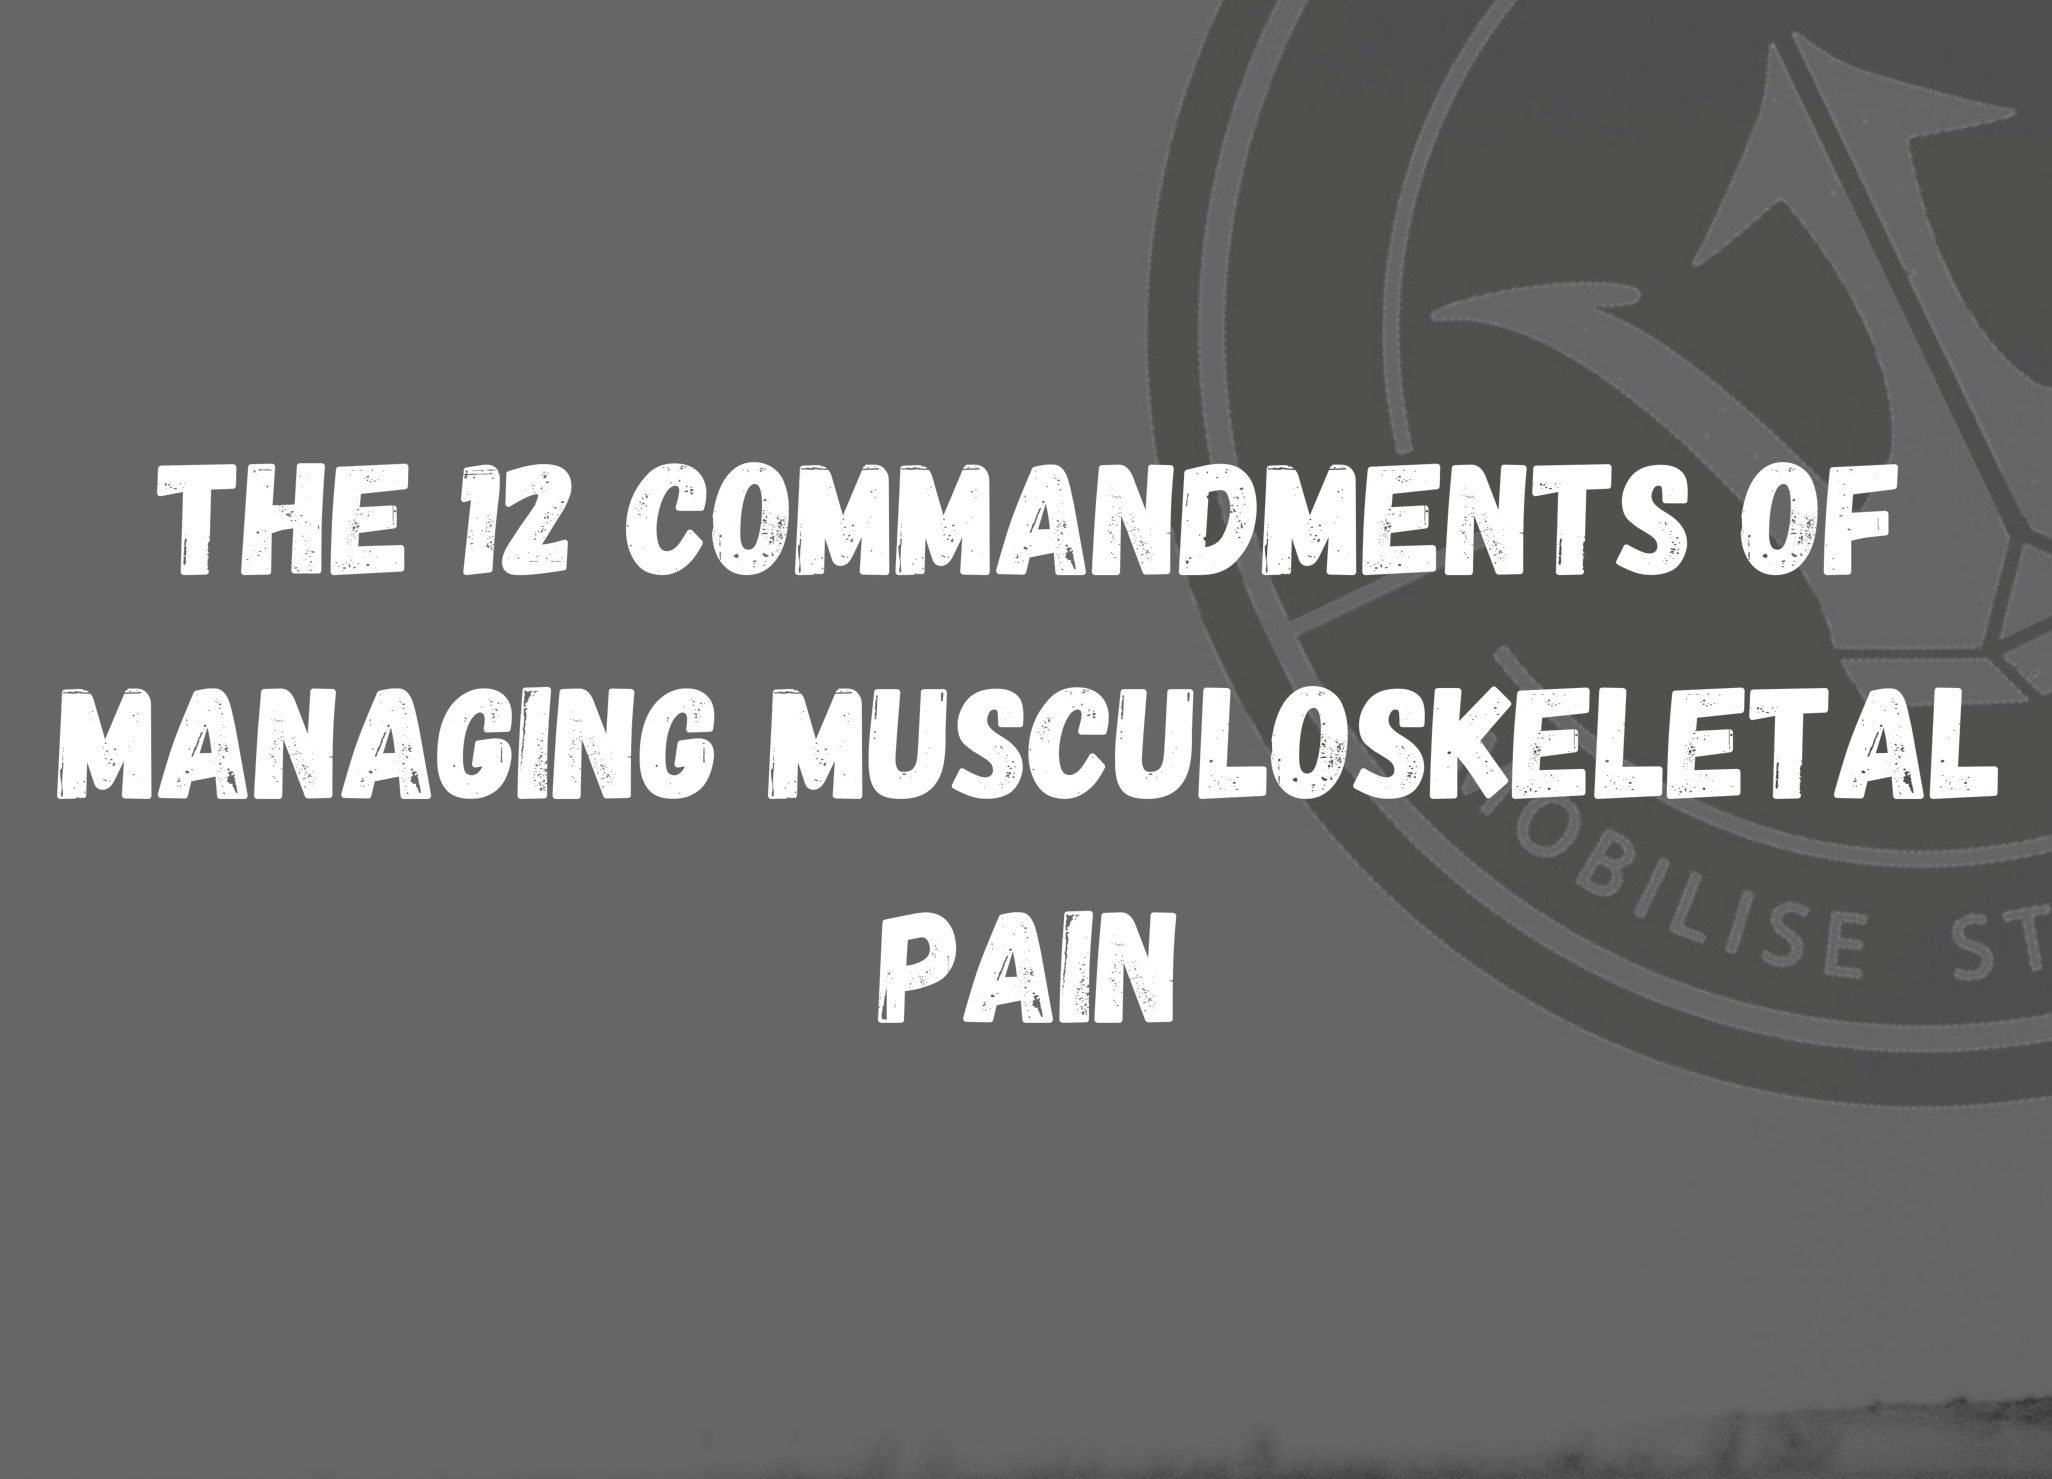 12 Commandments of Managing Musculoskeletal Pain